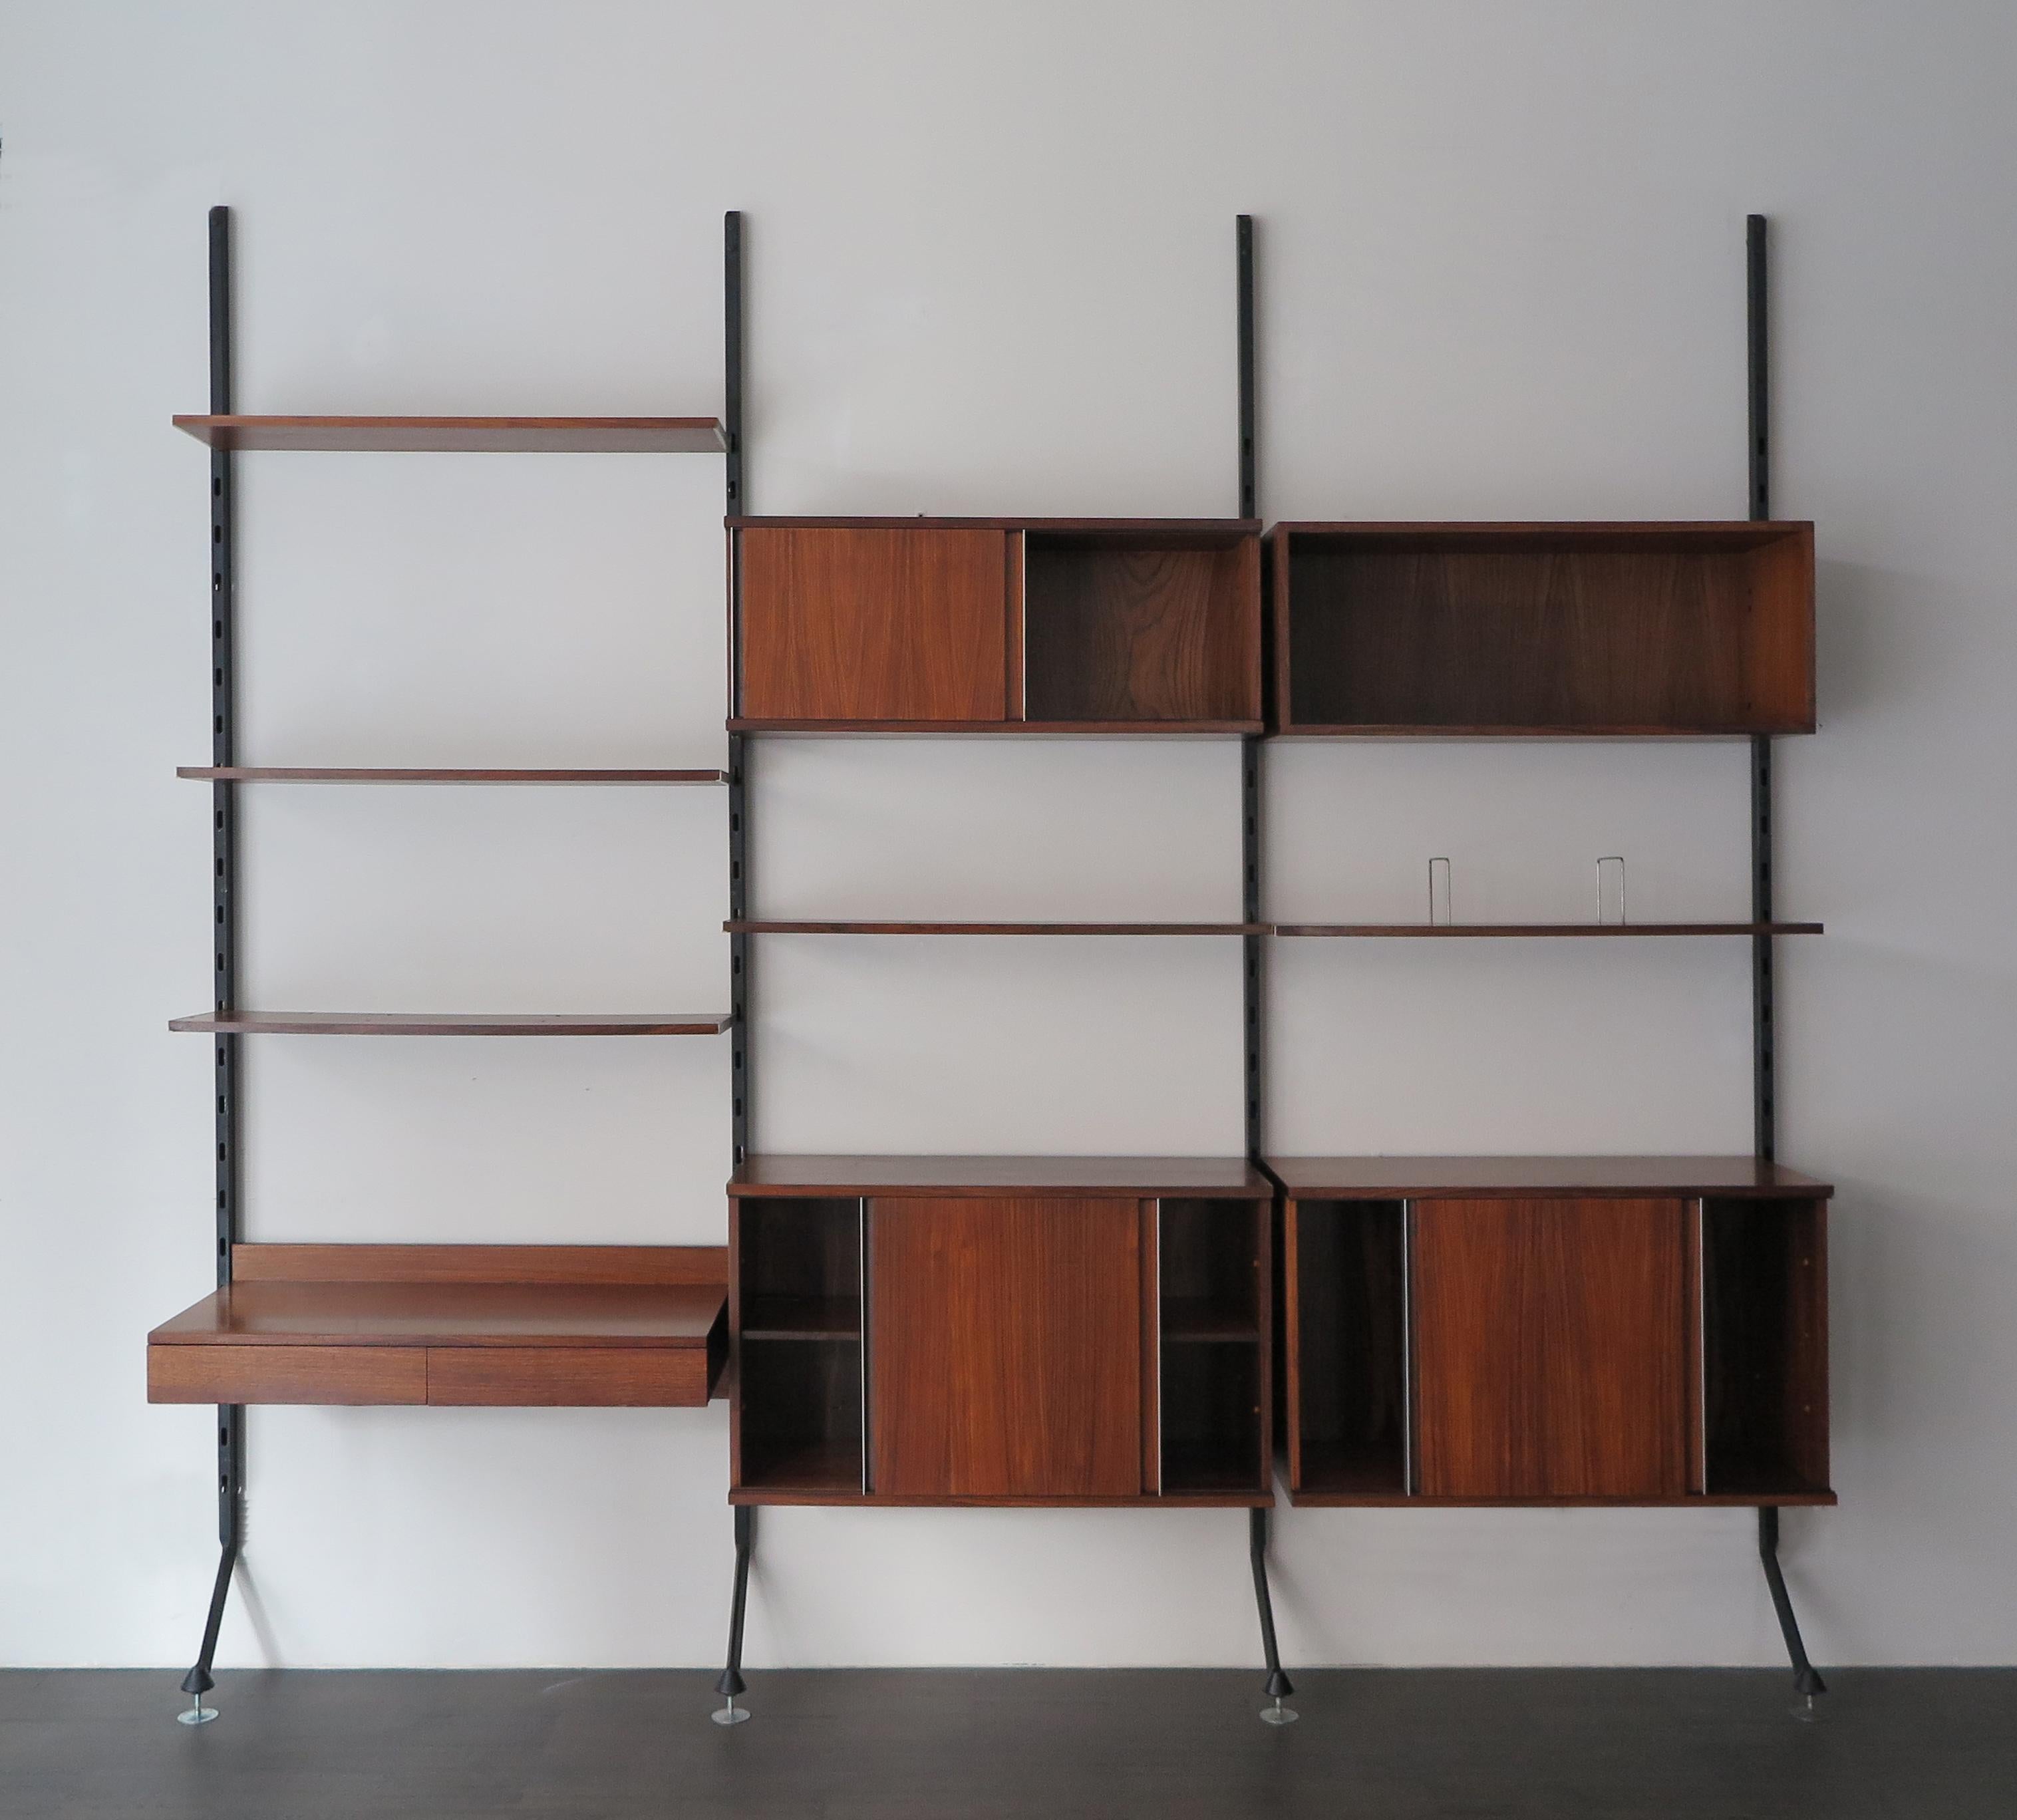 Rosewood wall unit system model Urio designed by Ico Parisi for MIM “Mobili Italiani Moderni” in 1957, all hanging pieces are veneered with real rosewood and feature handles and decorations made of aluminium and manufacturer's